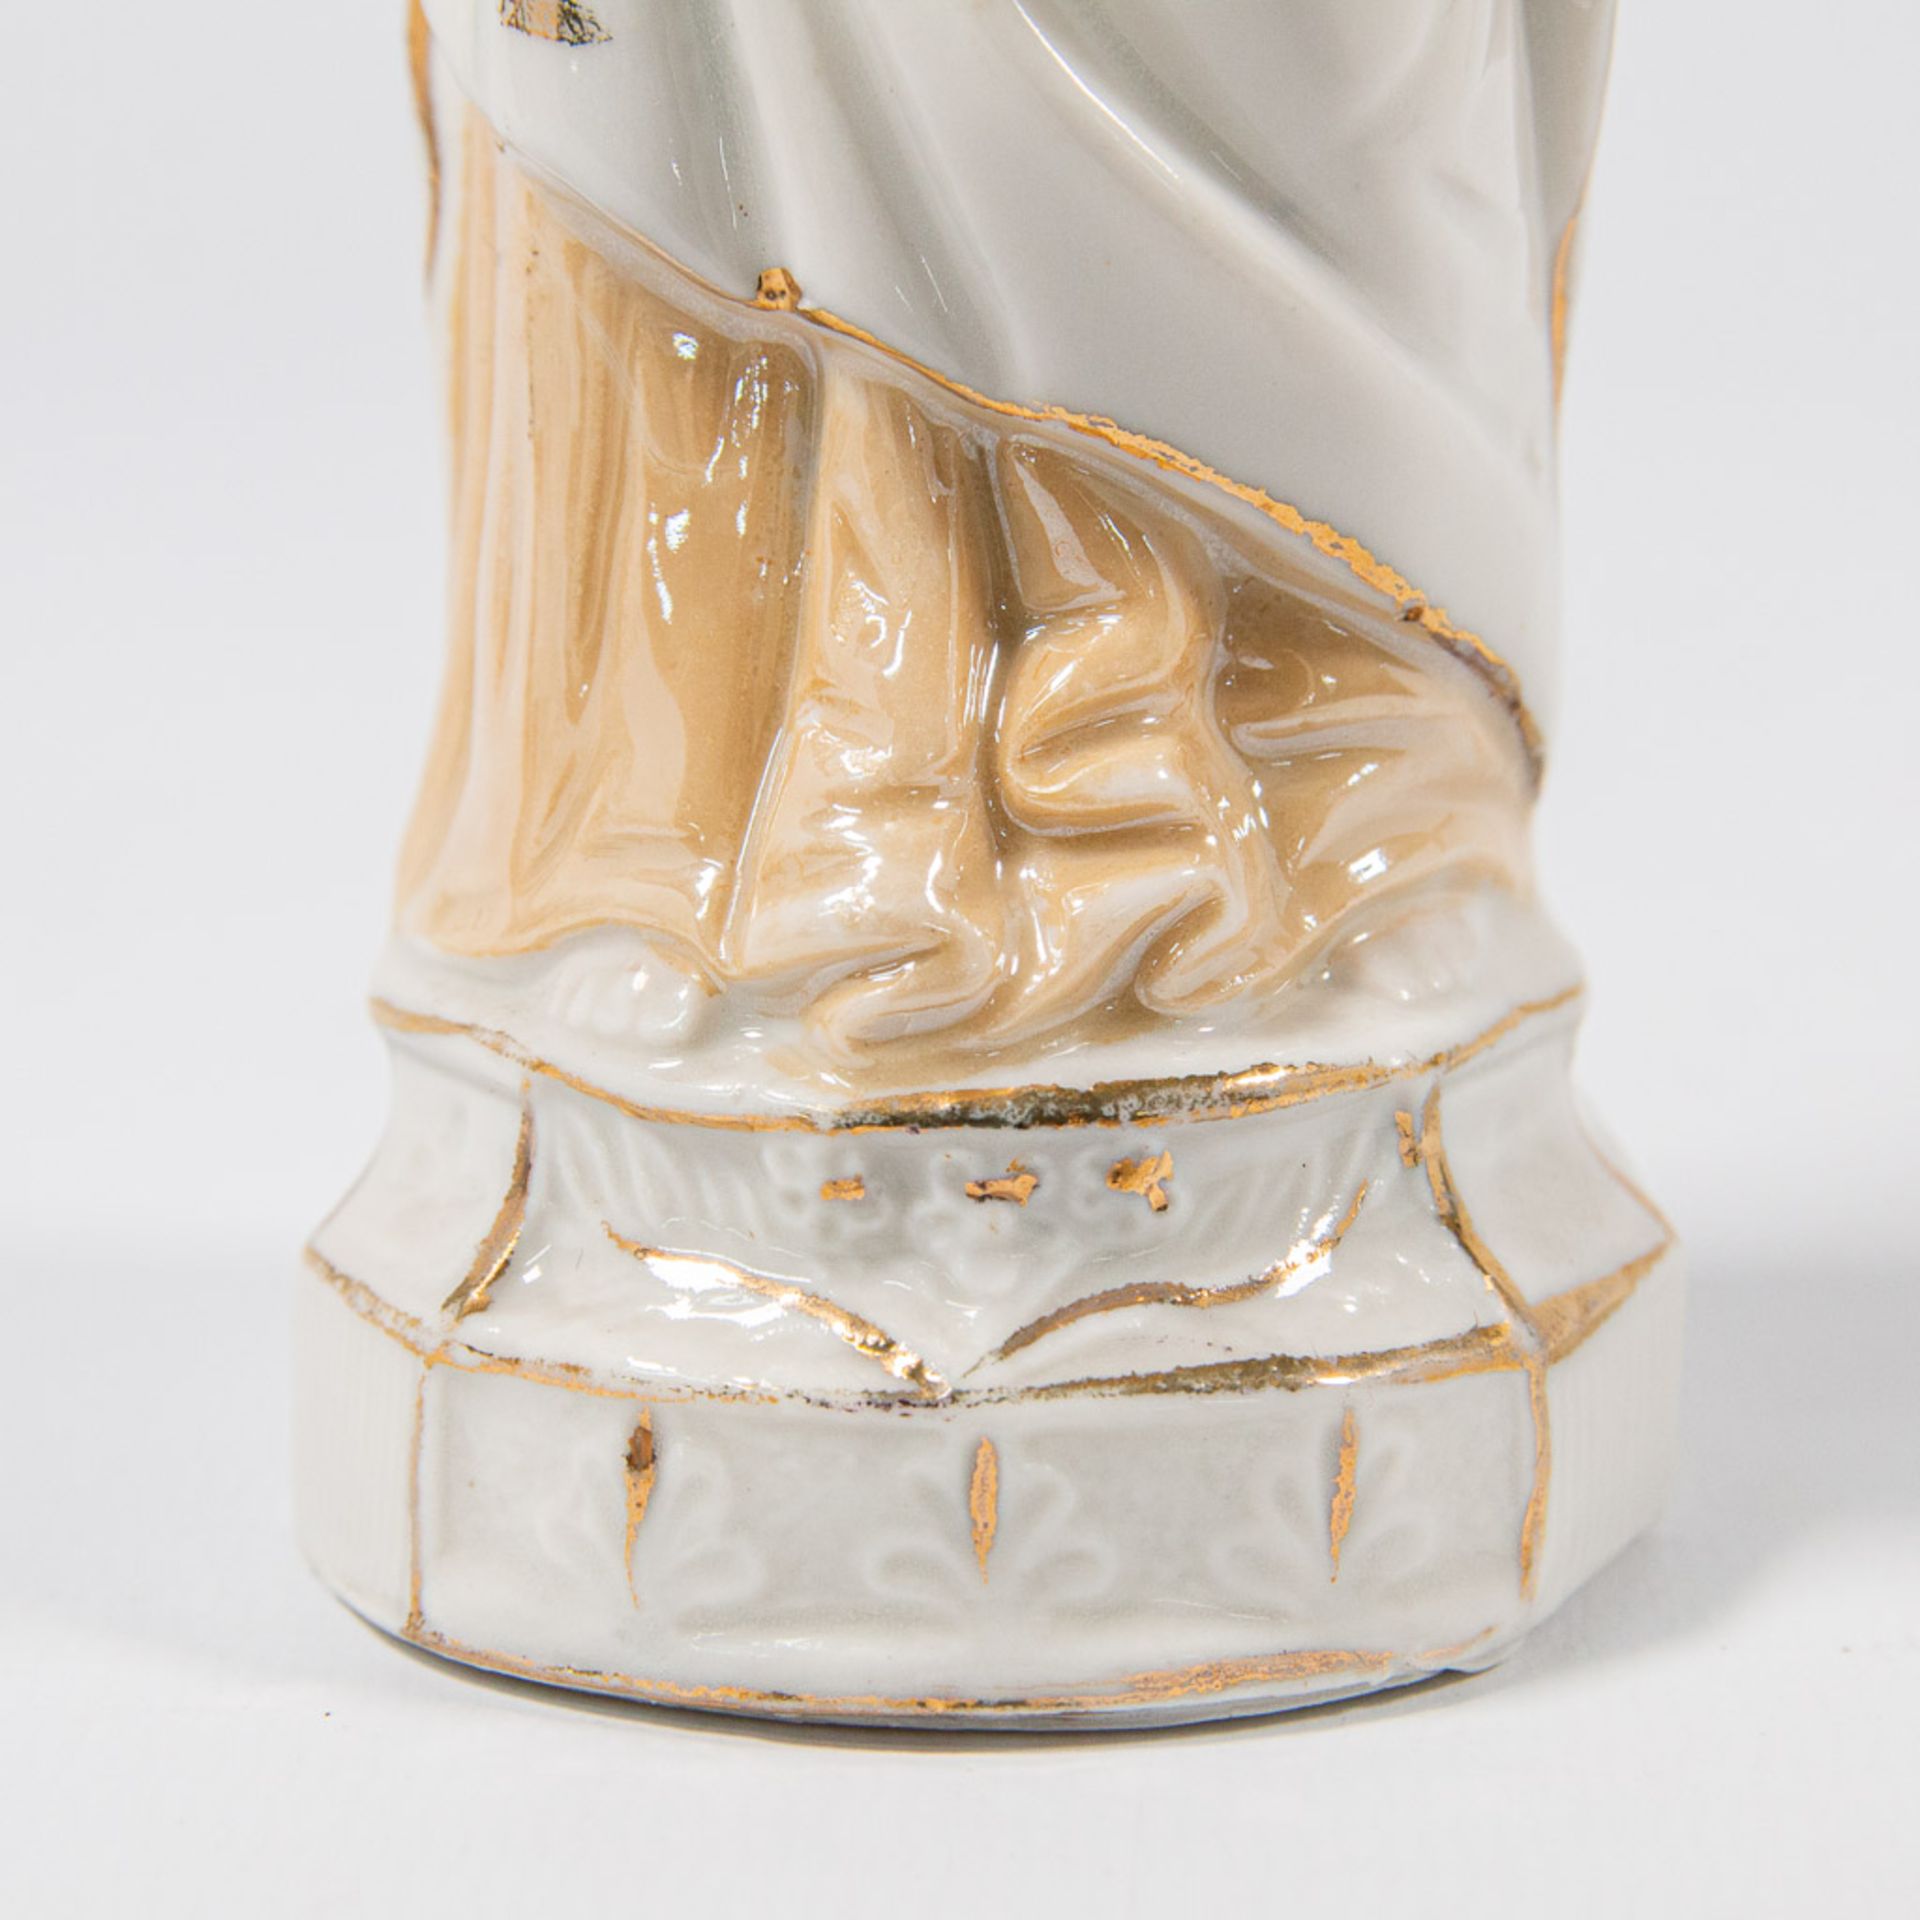 A collection of 11 bisque porcelain holy statues, Mary, Joseph, and Madonna. - Image 28 of 49